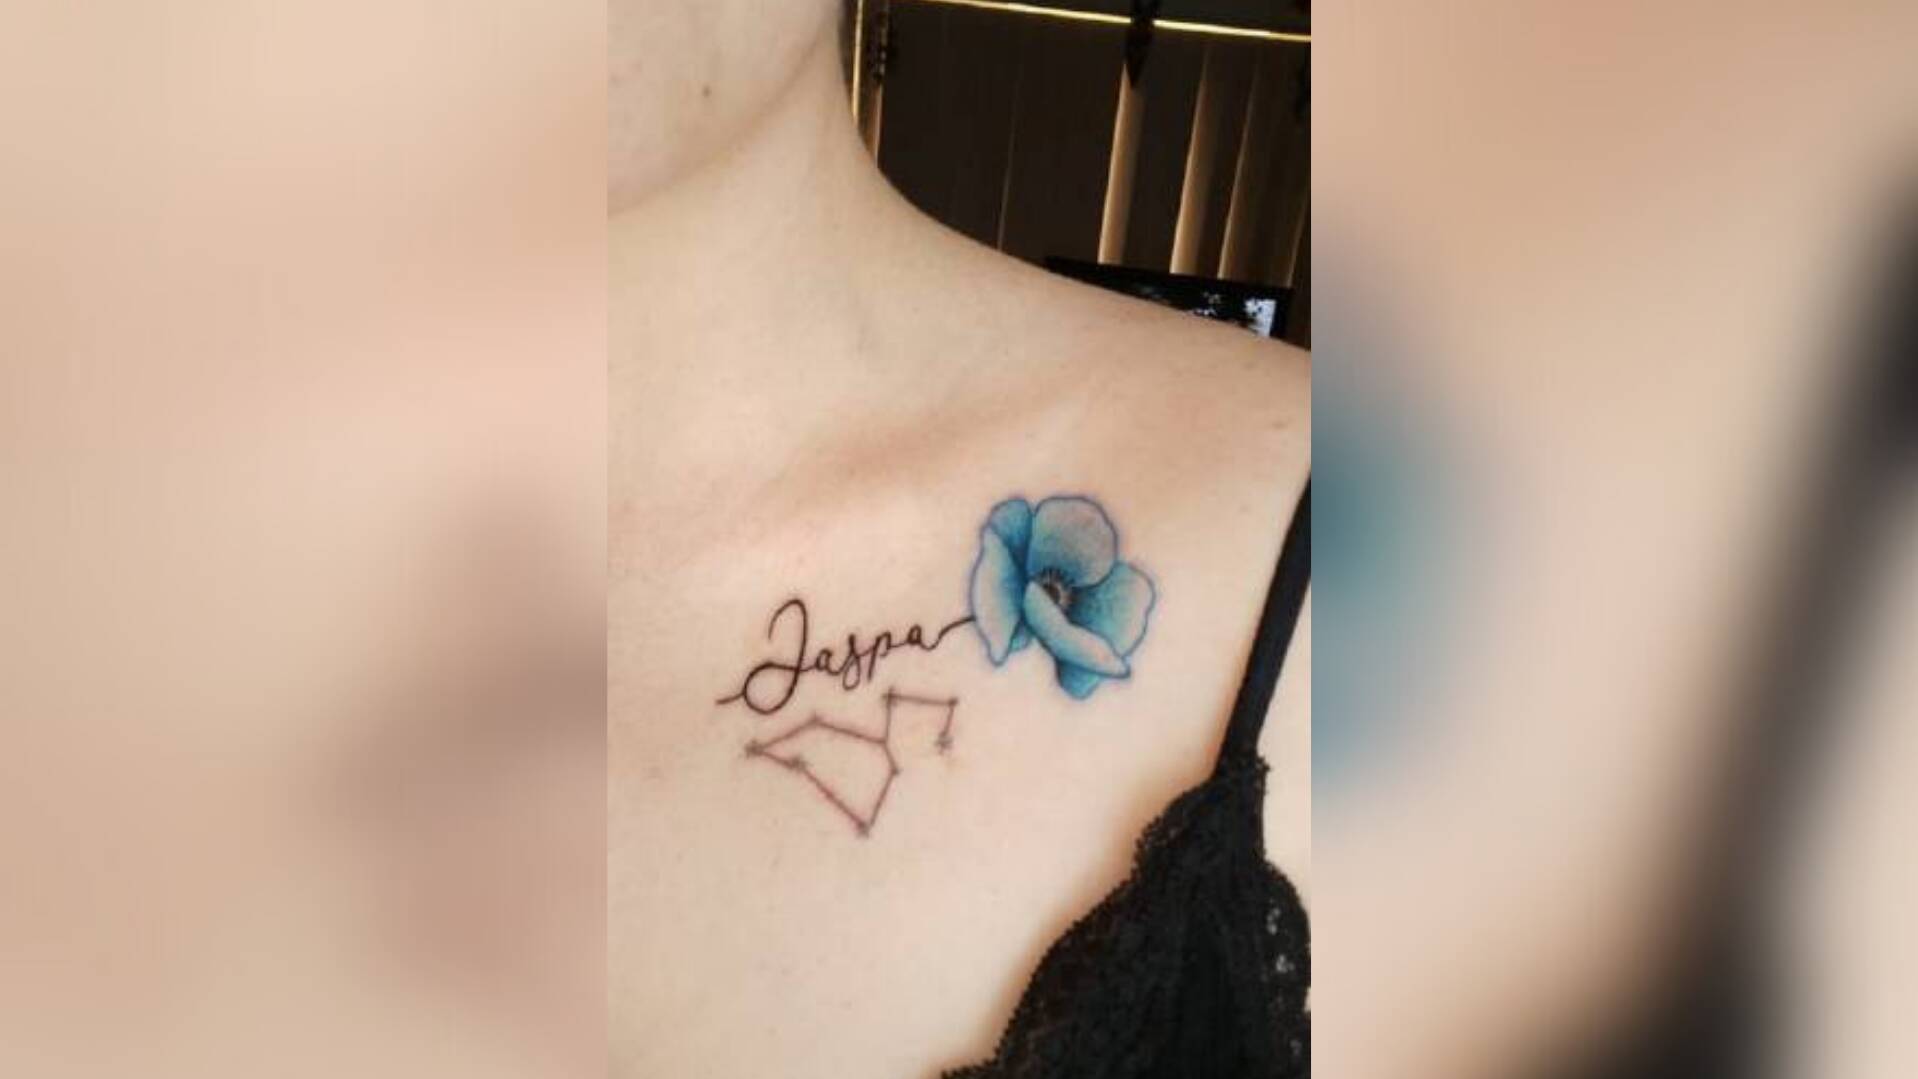 Getting personal: What do your tattoos really mean?